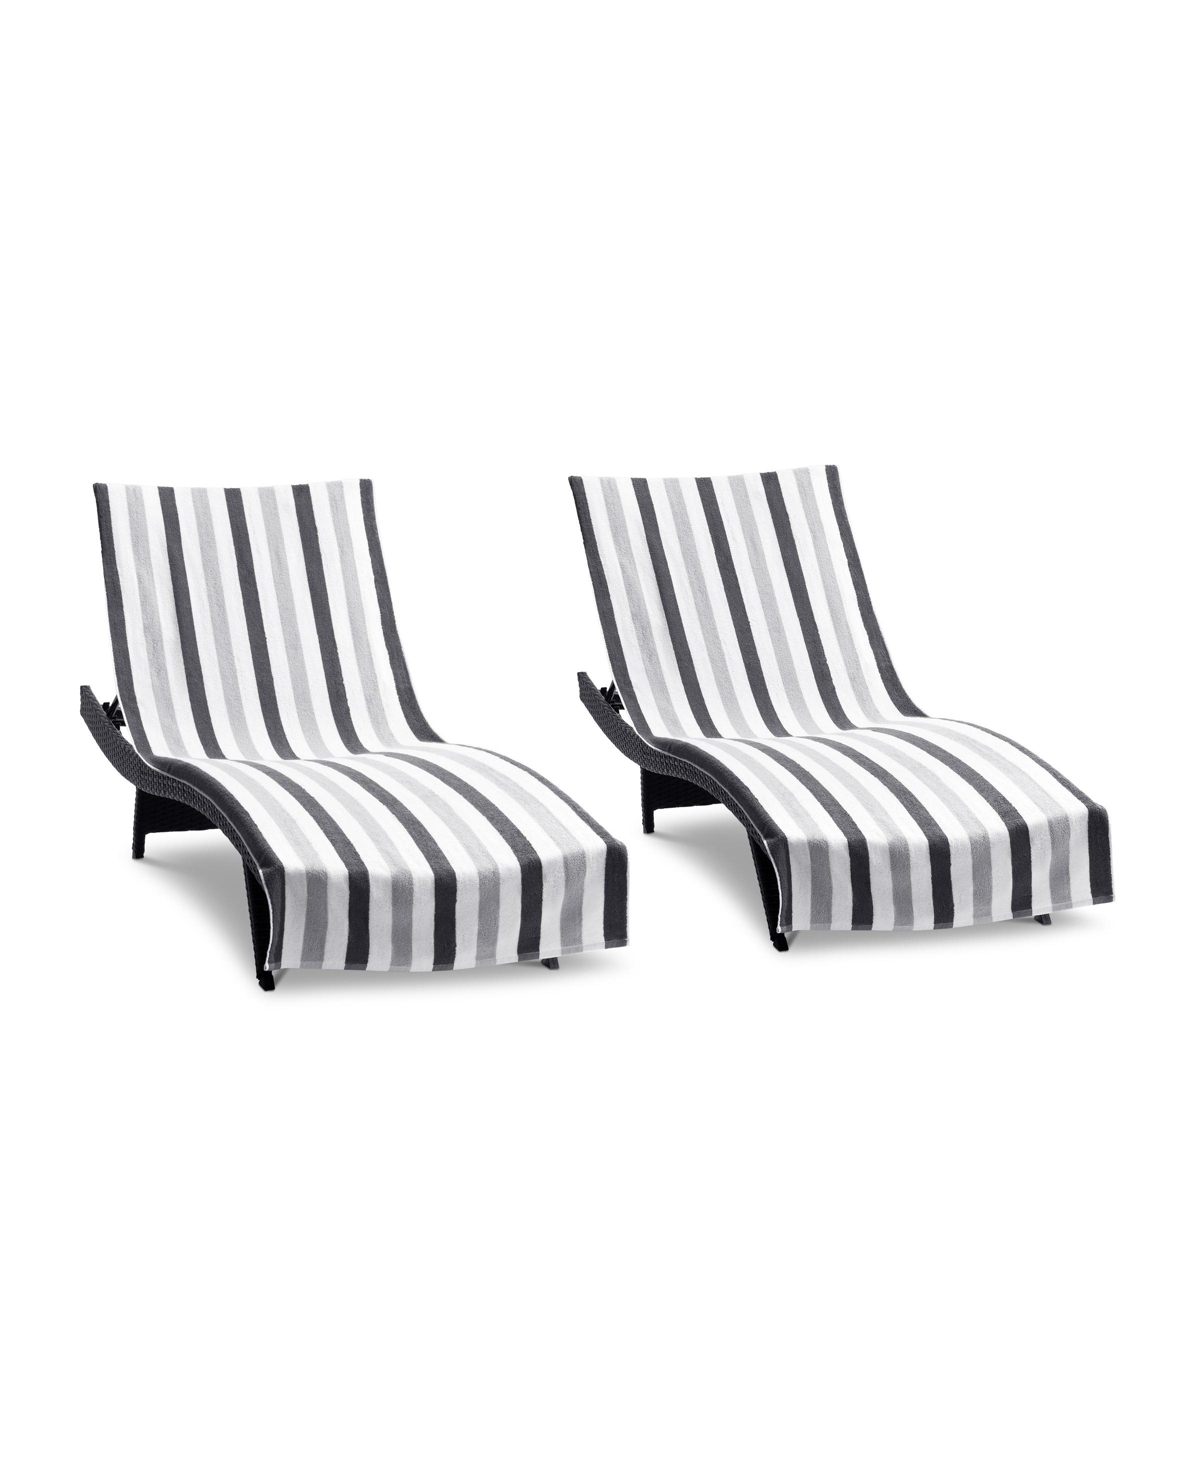 Cabo Cabana Chaise Lounge Chair Covers (2 Pack), Striped Color Options, Soft Cotton, 30x85 in. with 8" Fitted Pocked for Beach Chair -